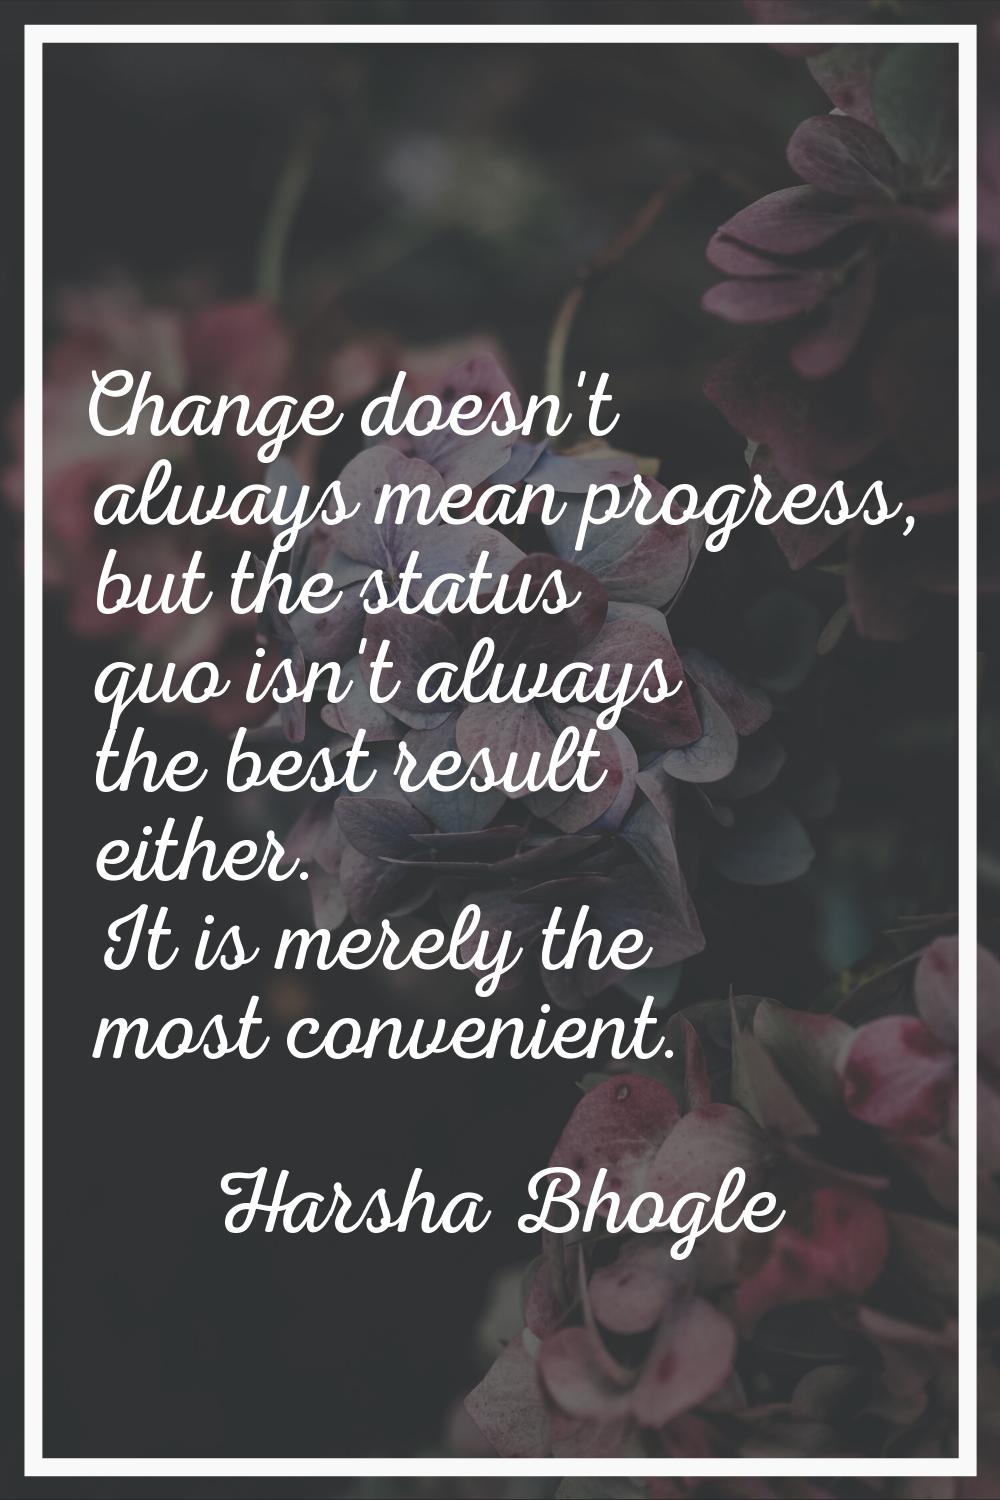 Change doesn't always mean progress, but the status quo isn't always the best result either. It is 